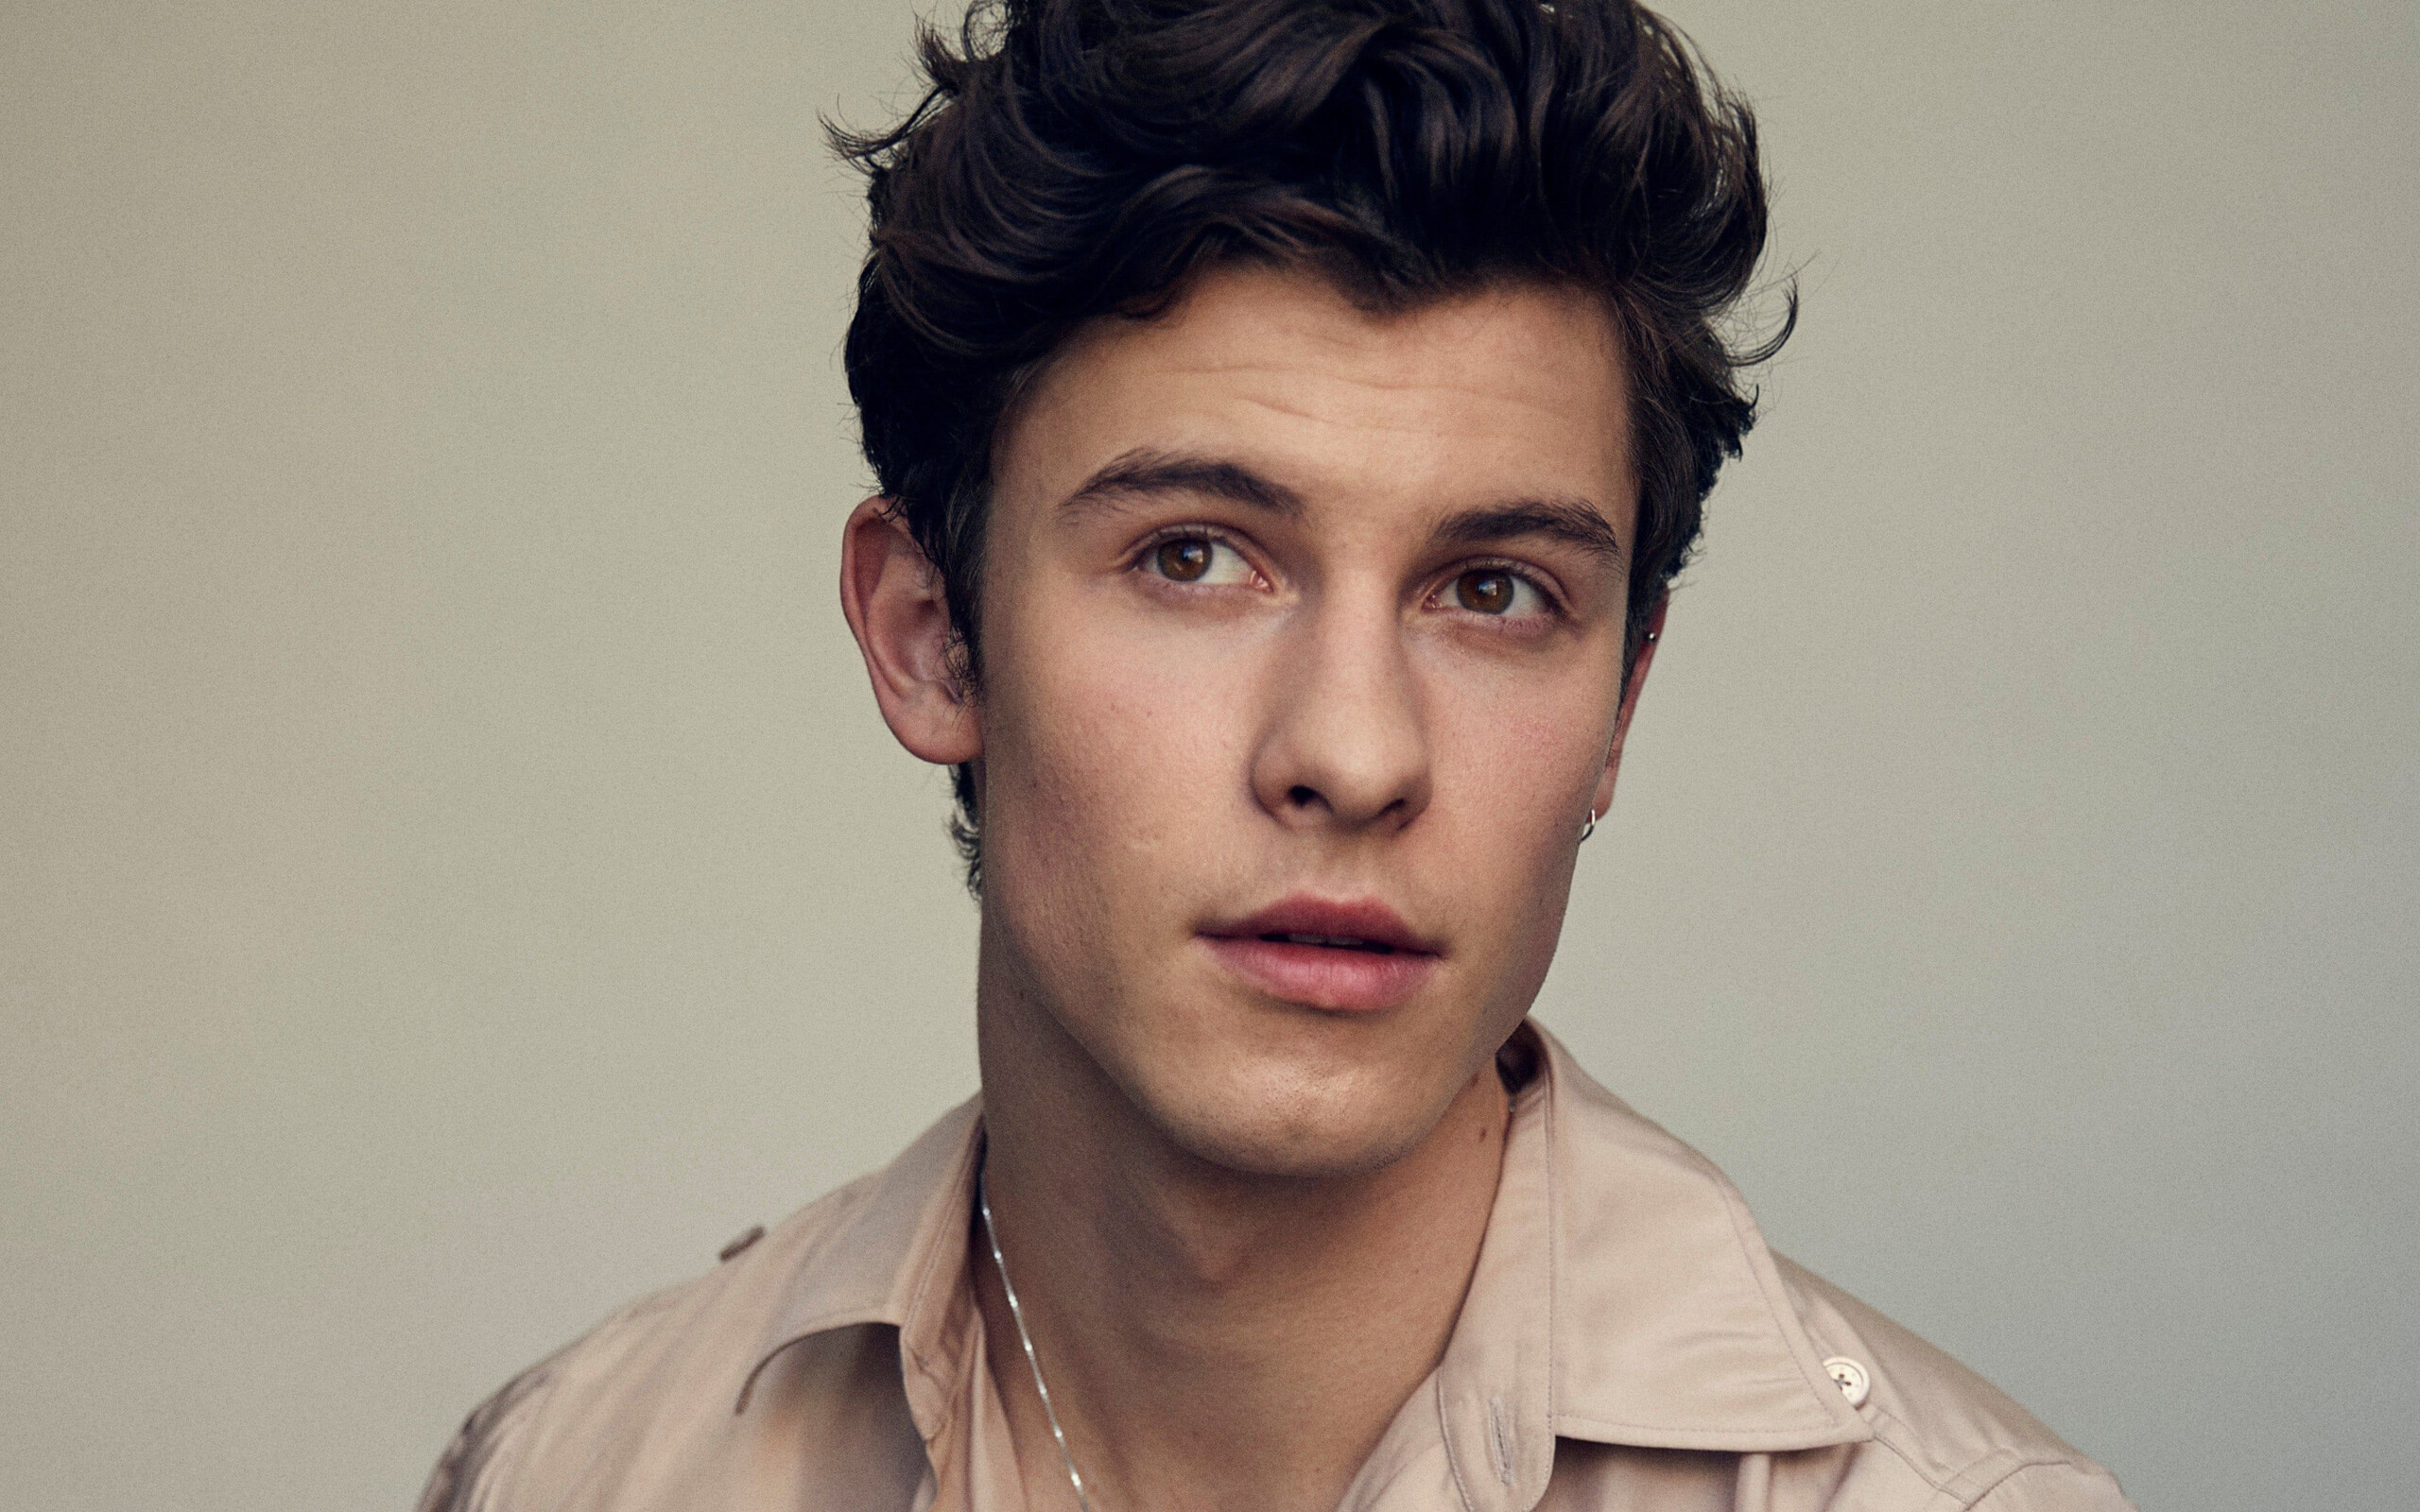 Shawn Mendes: "Treat You Better" reached the top 10 on the Billboard Hot 100. 2560x1600 HD Wallpaper.